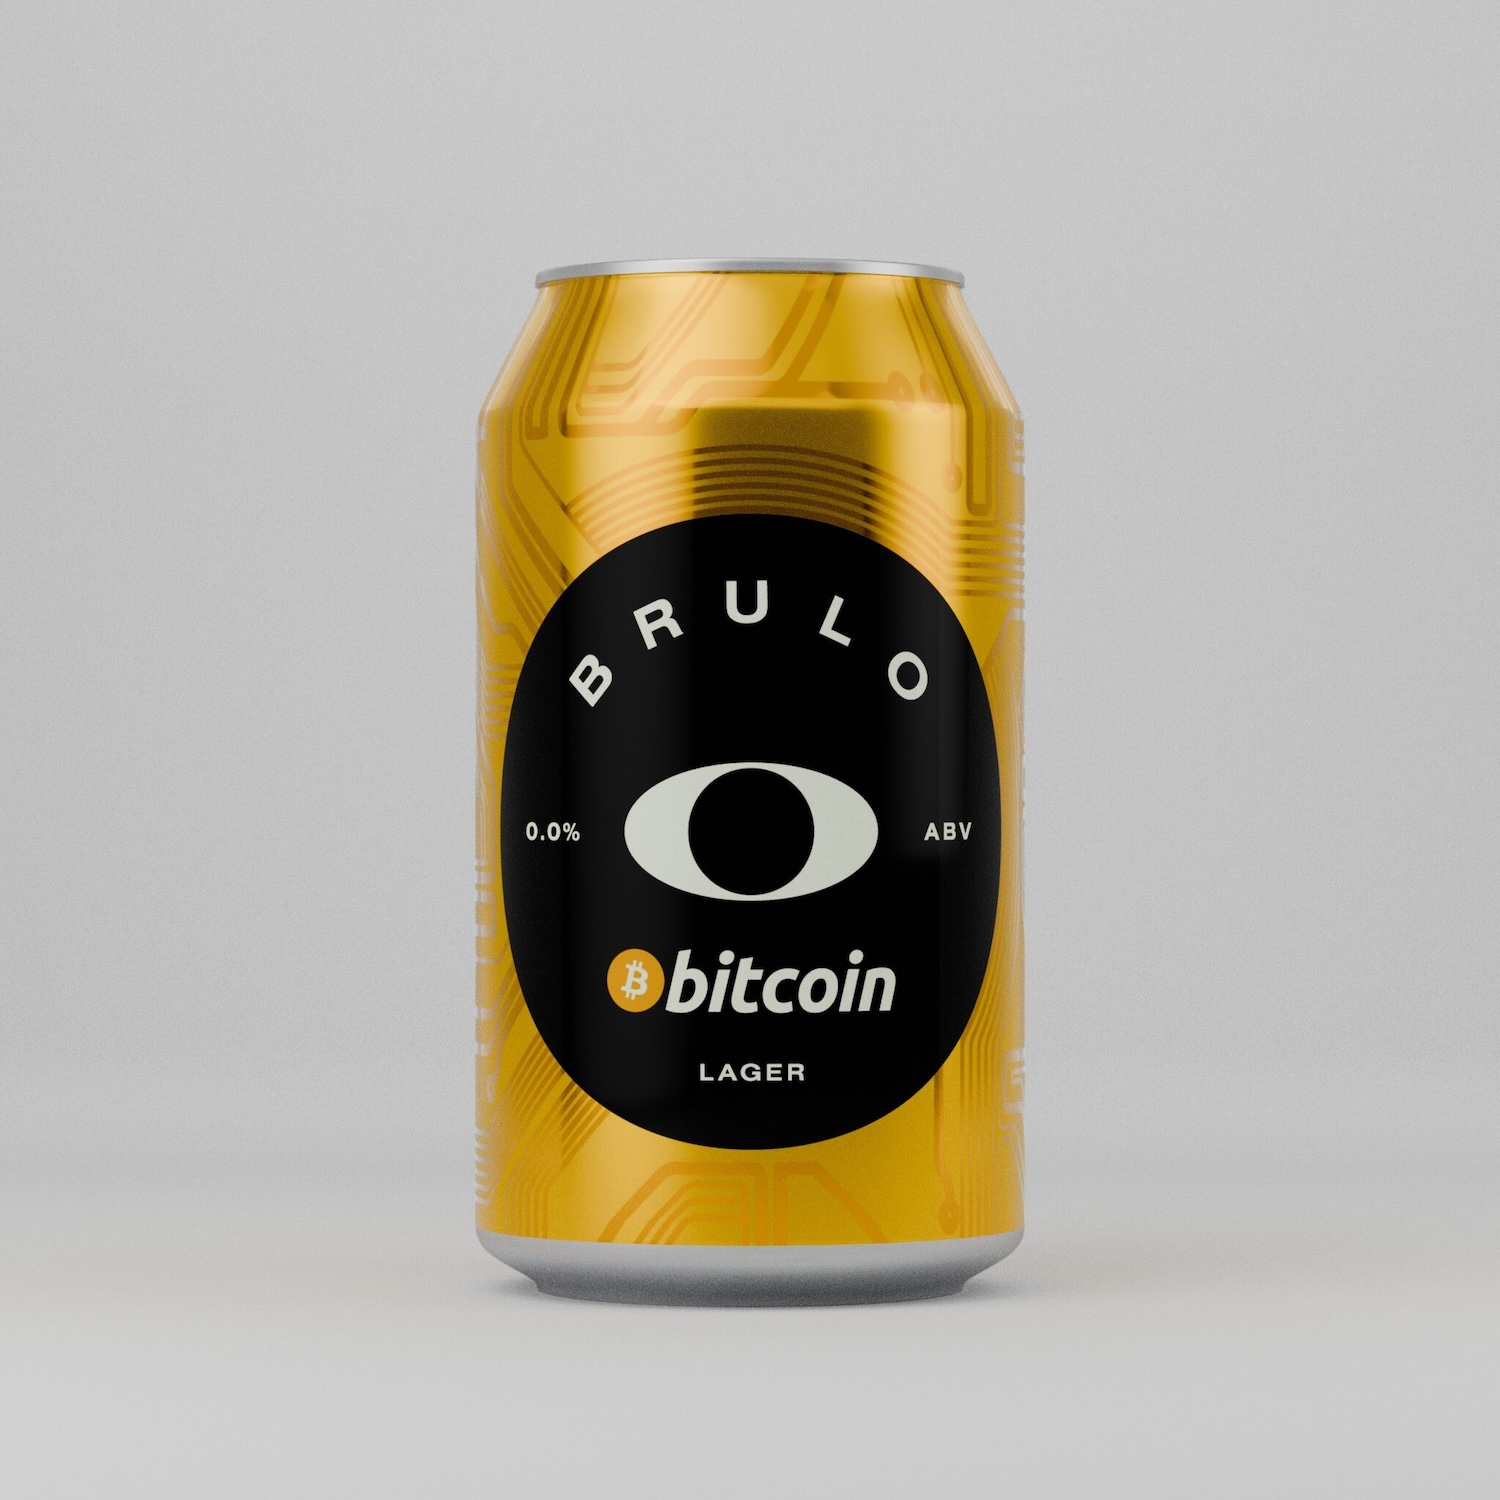 Scottish brewery launches 'Bitcoin Beer' ahead of halving event